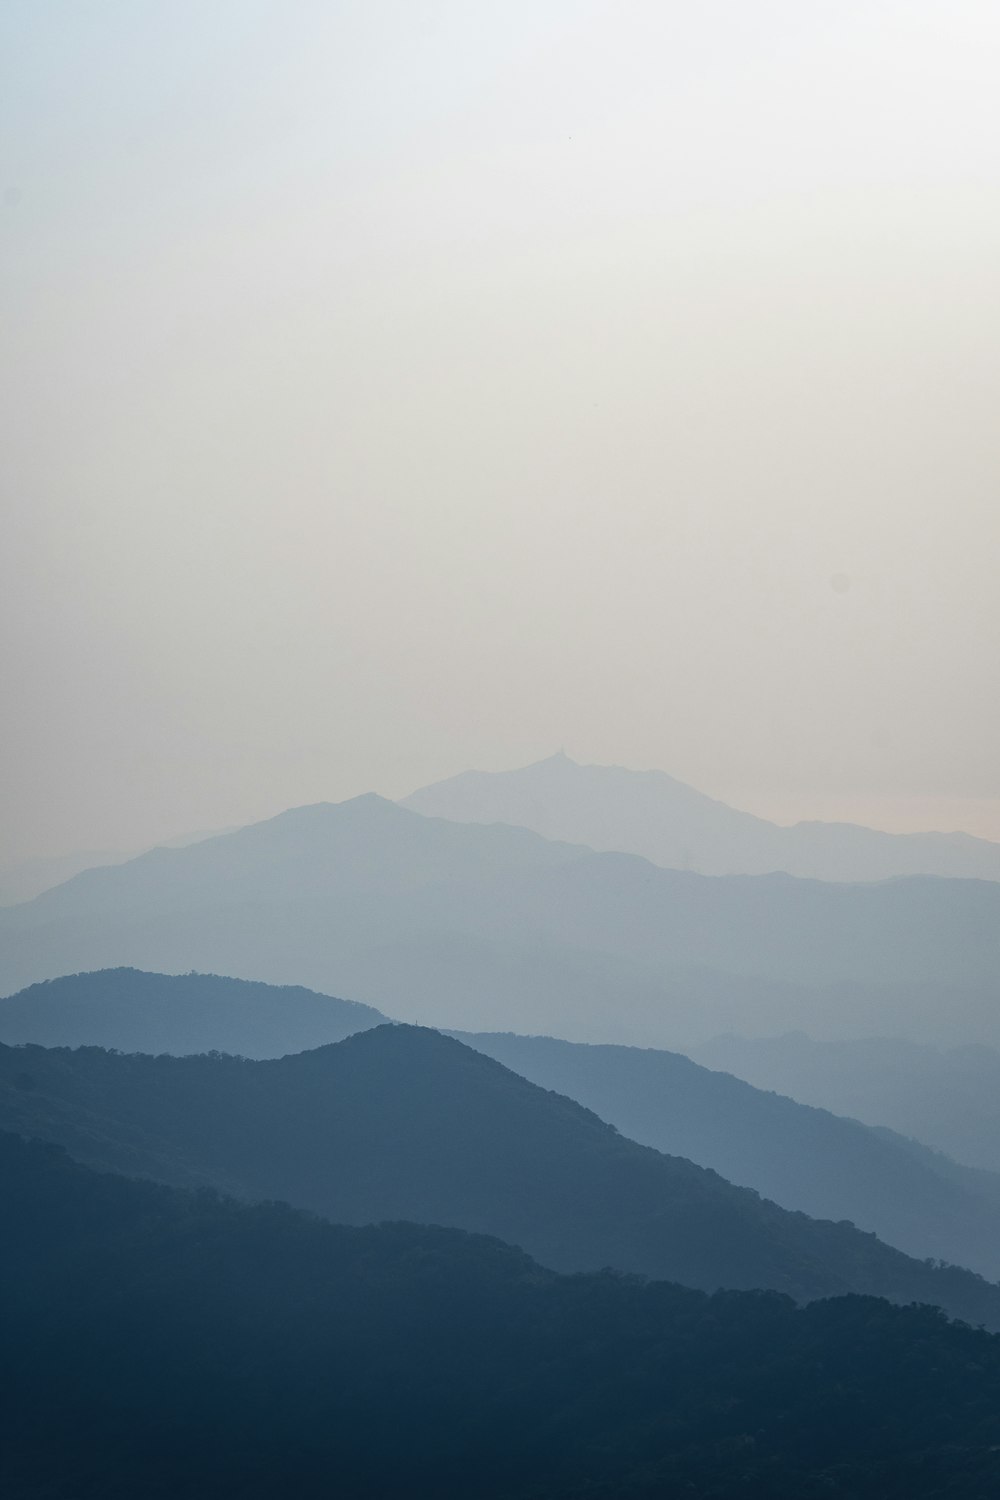 a view of a mountain range in the distance